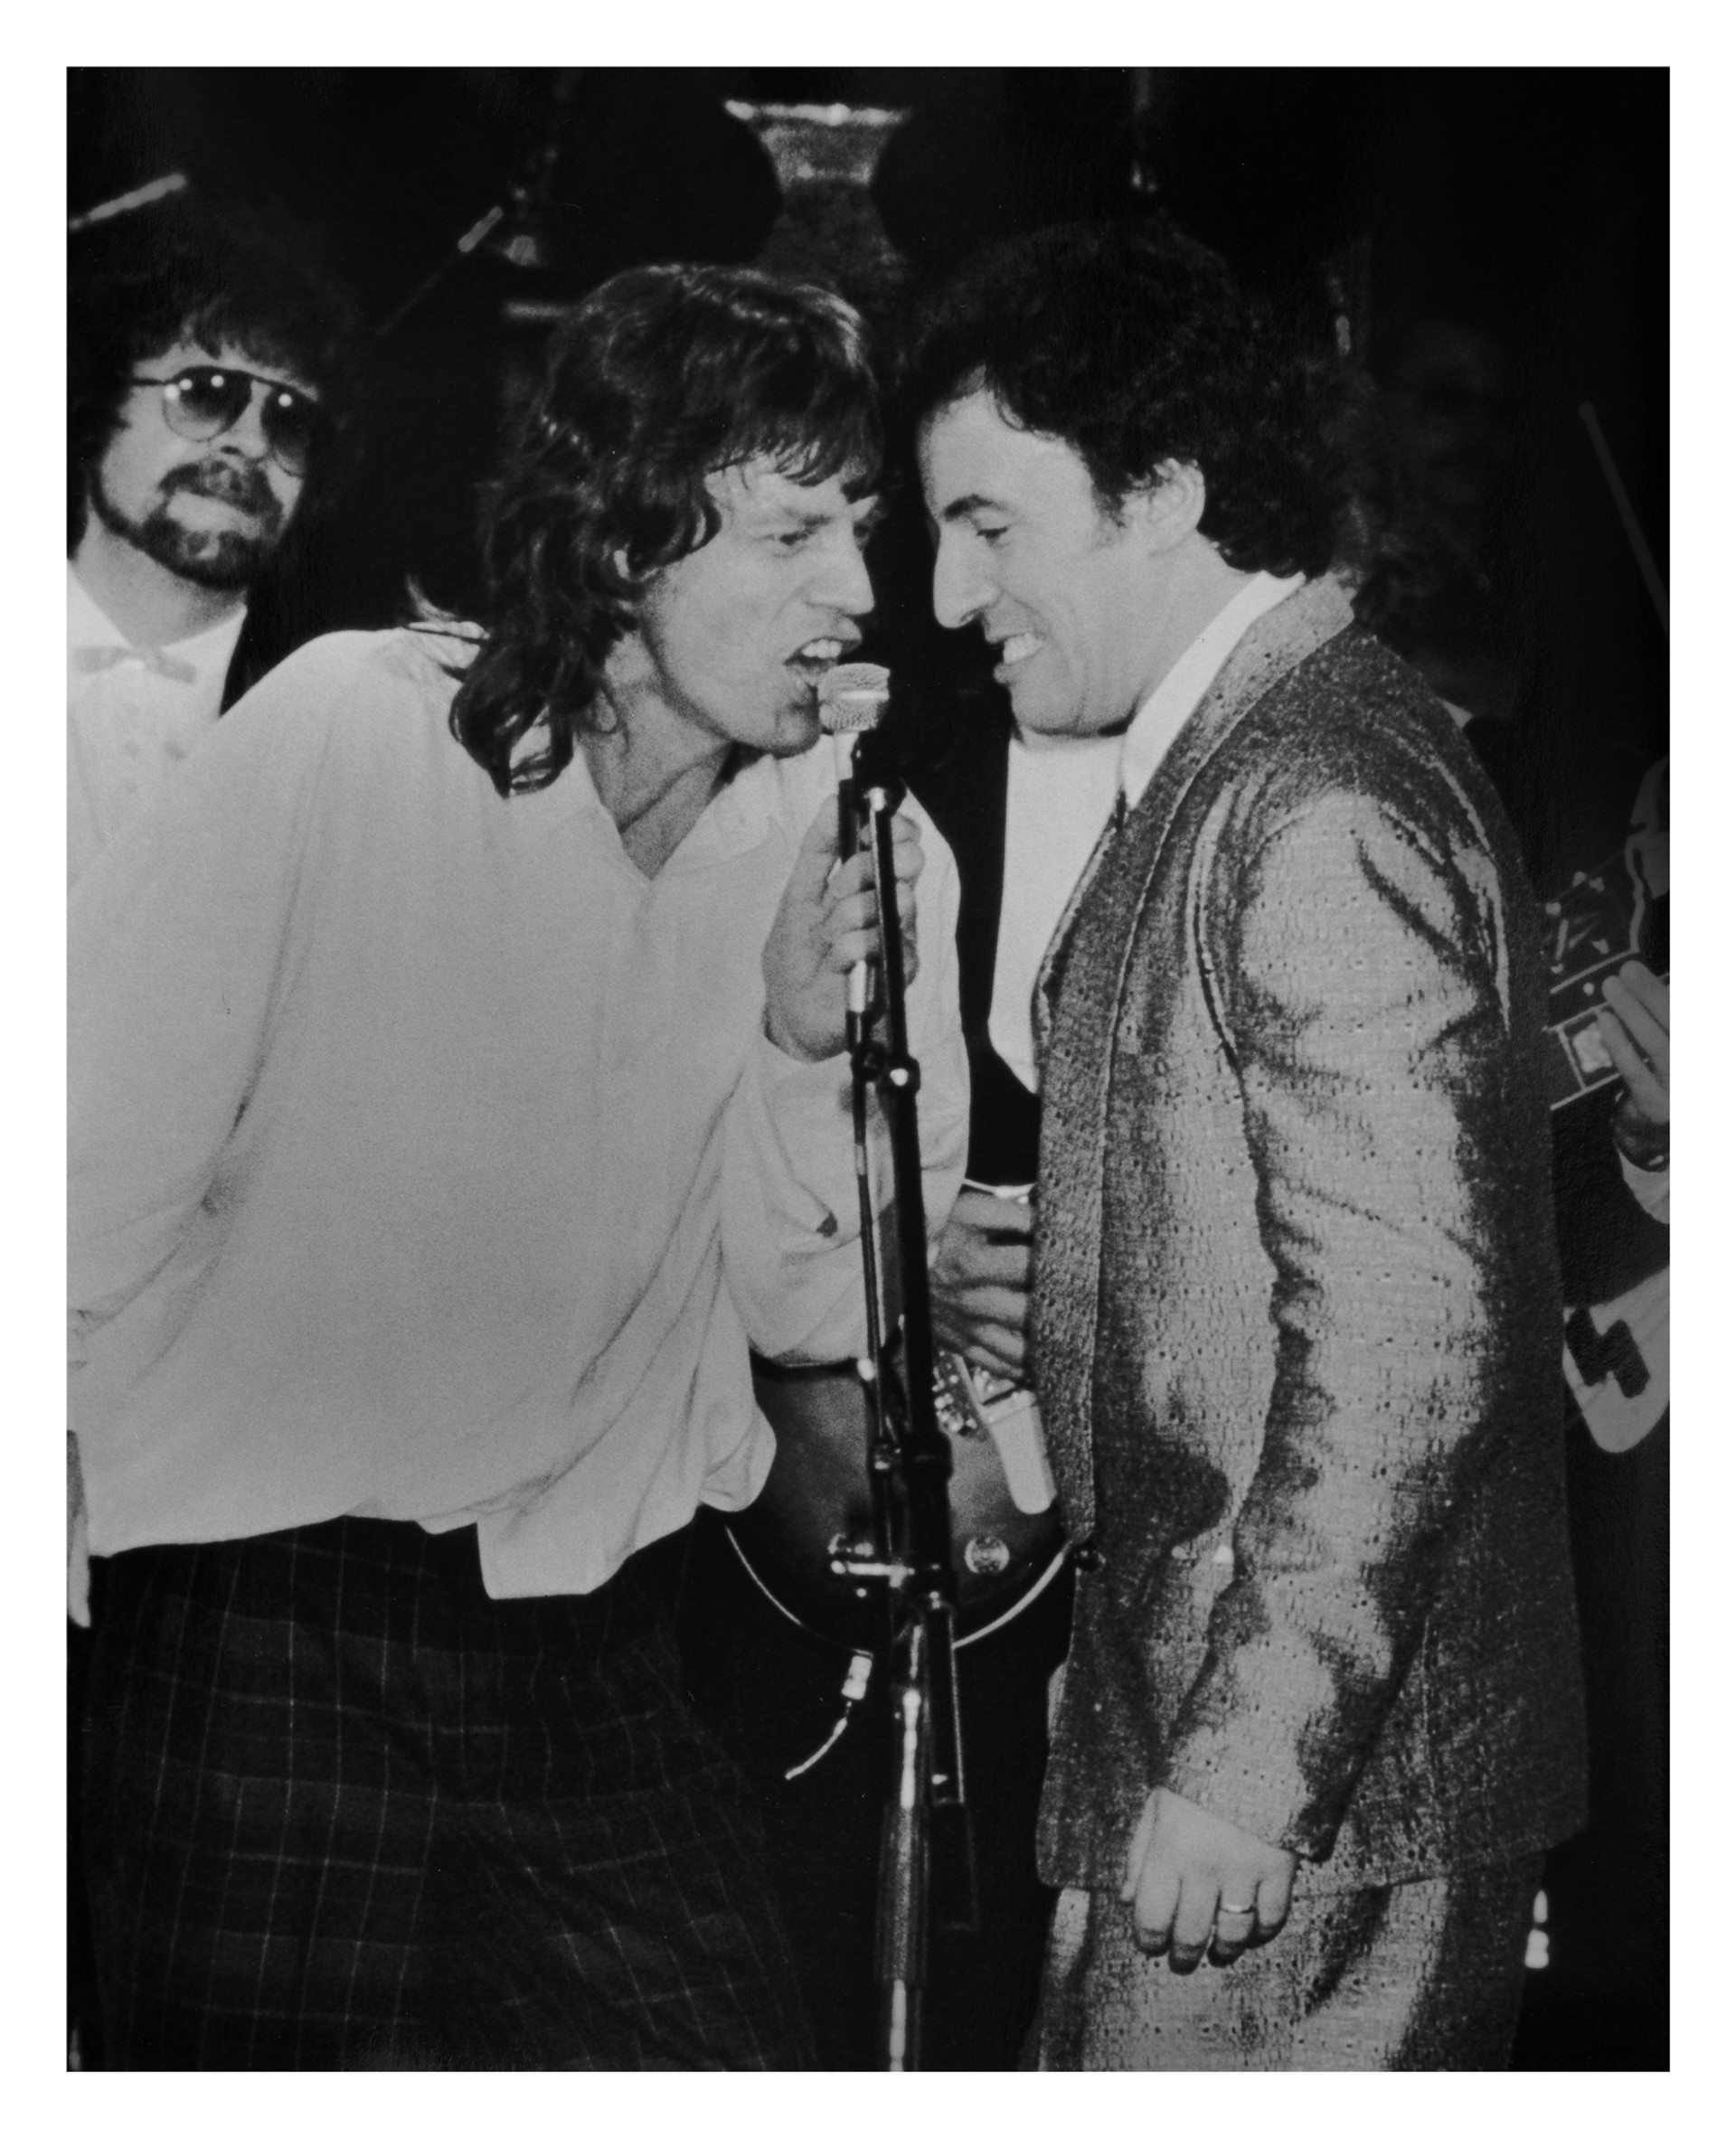 Mick Jagger and Bruce Springstein by Ron Galella